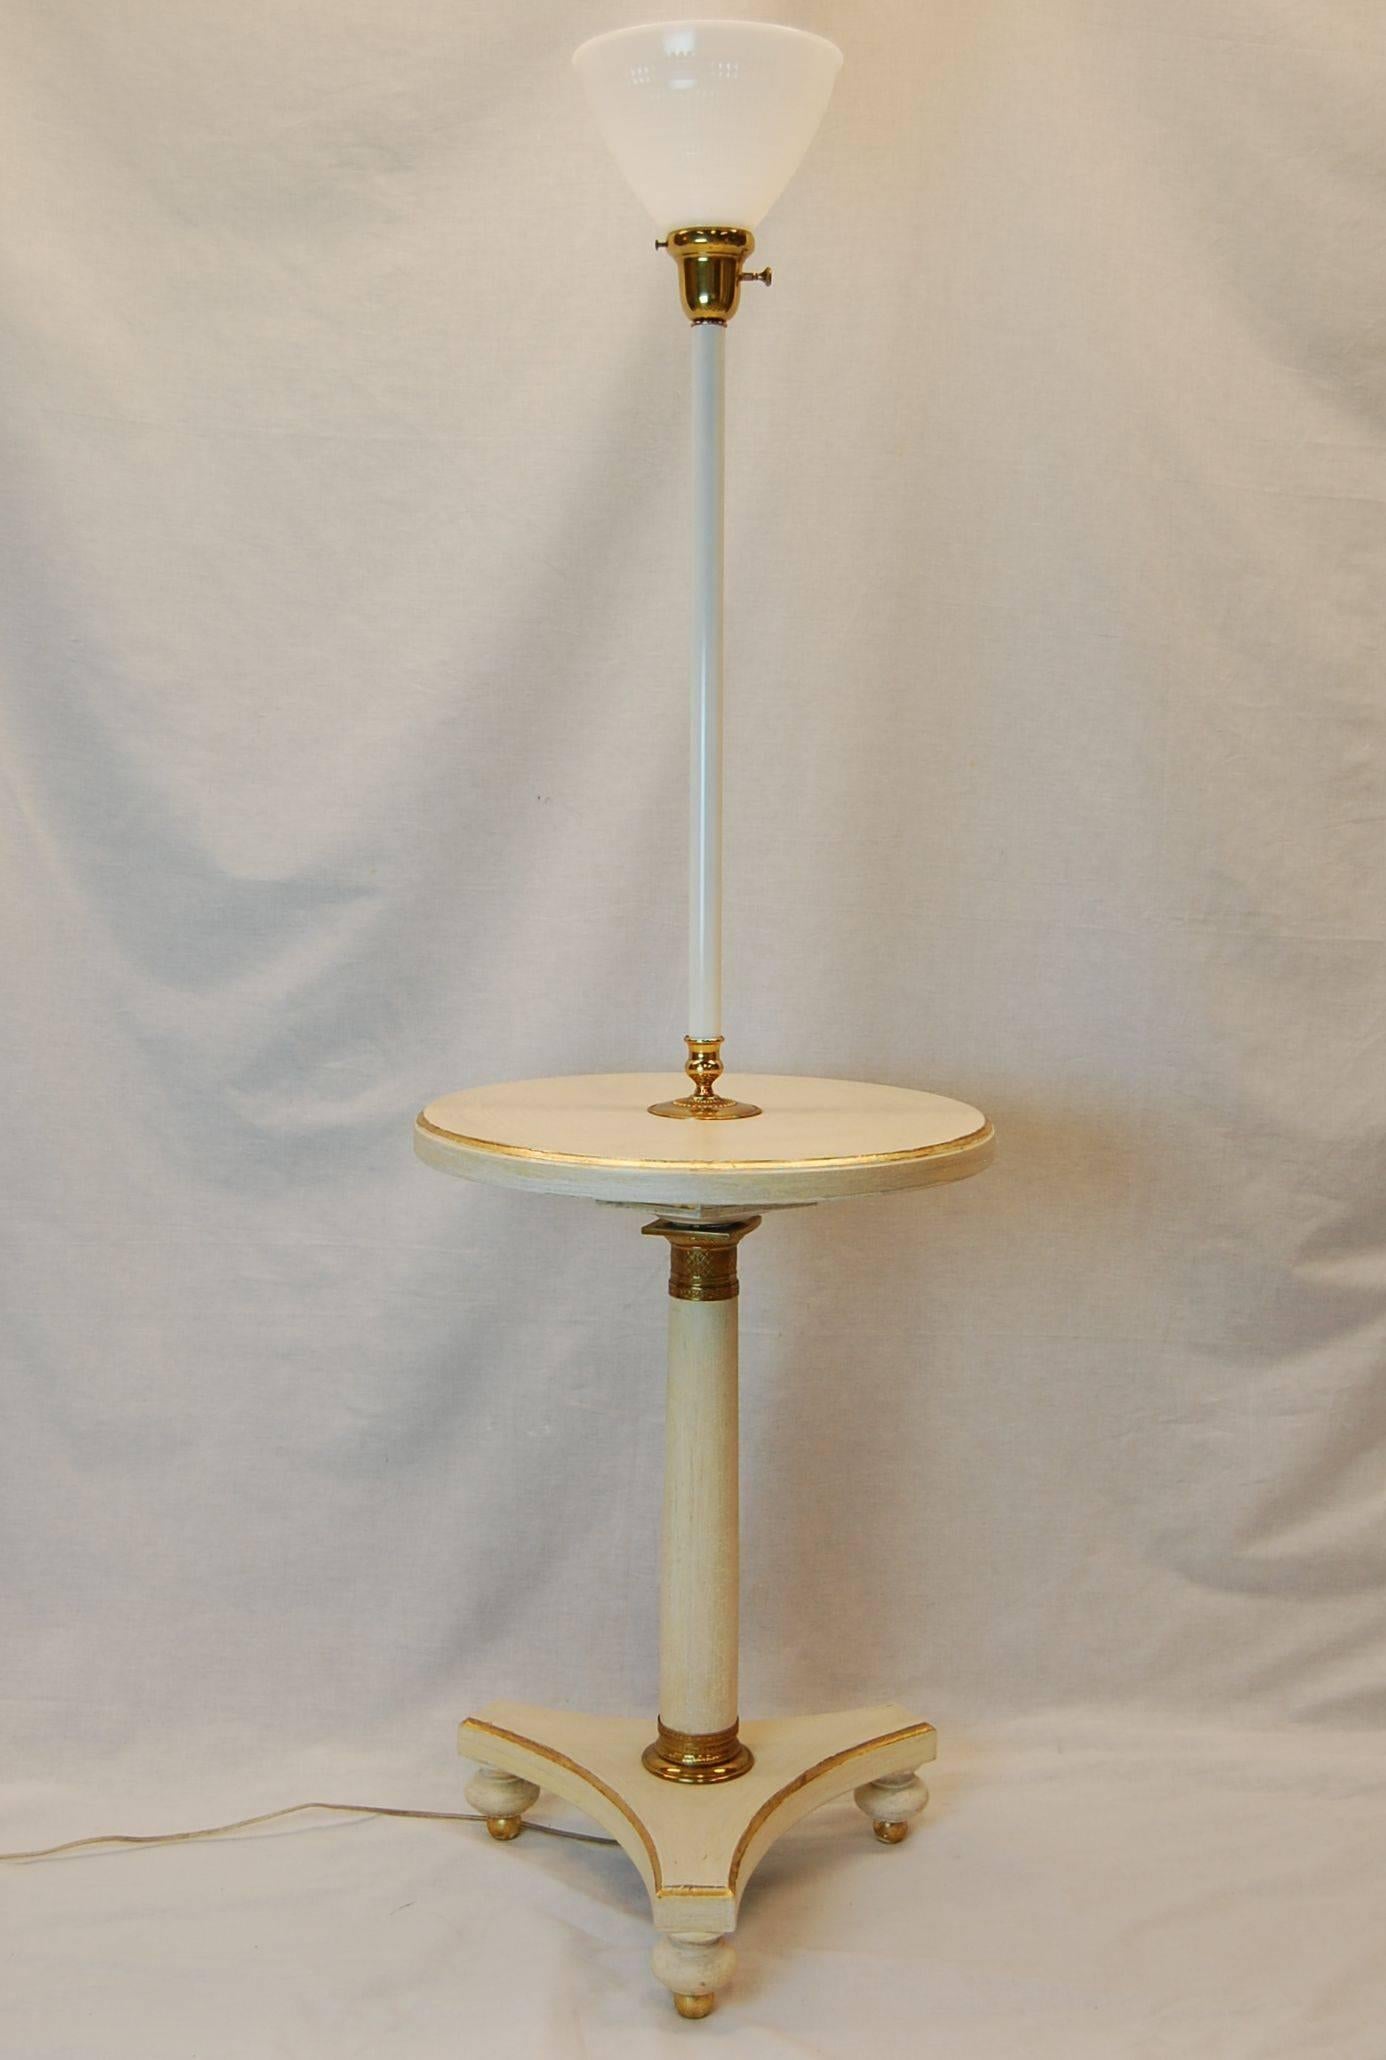 Floor lamp in crackle finished creamy white paint with gold edge decoration. Wired with a three way socket. Measure: The circular painted top is 18